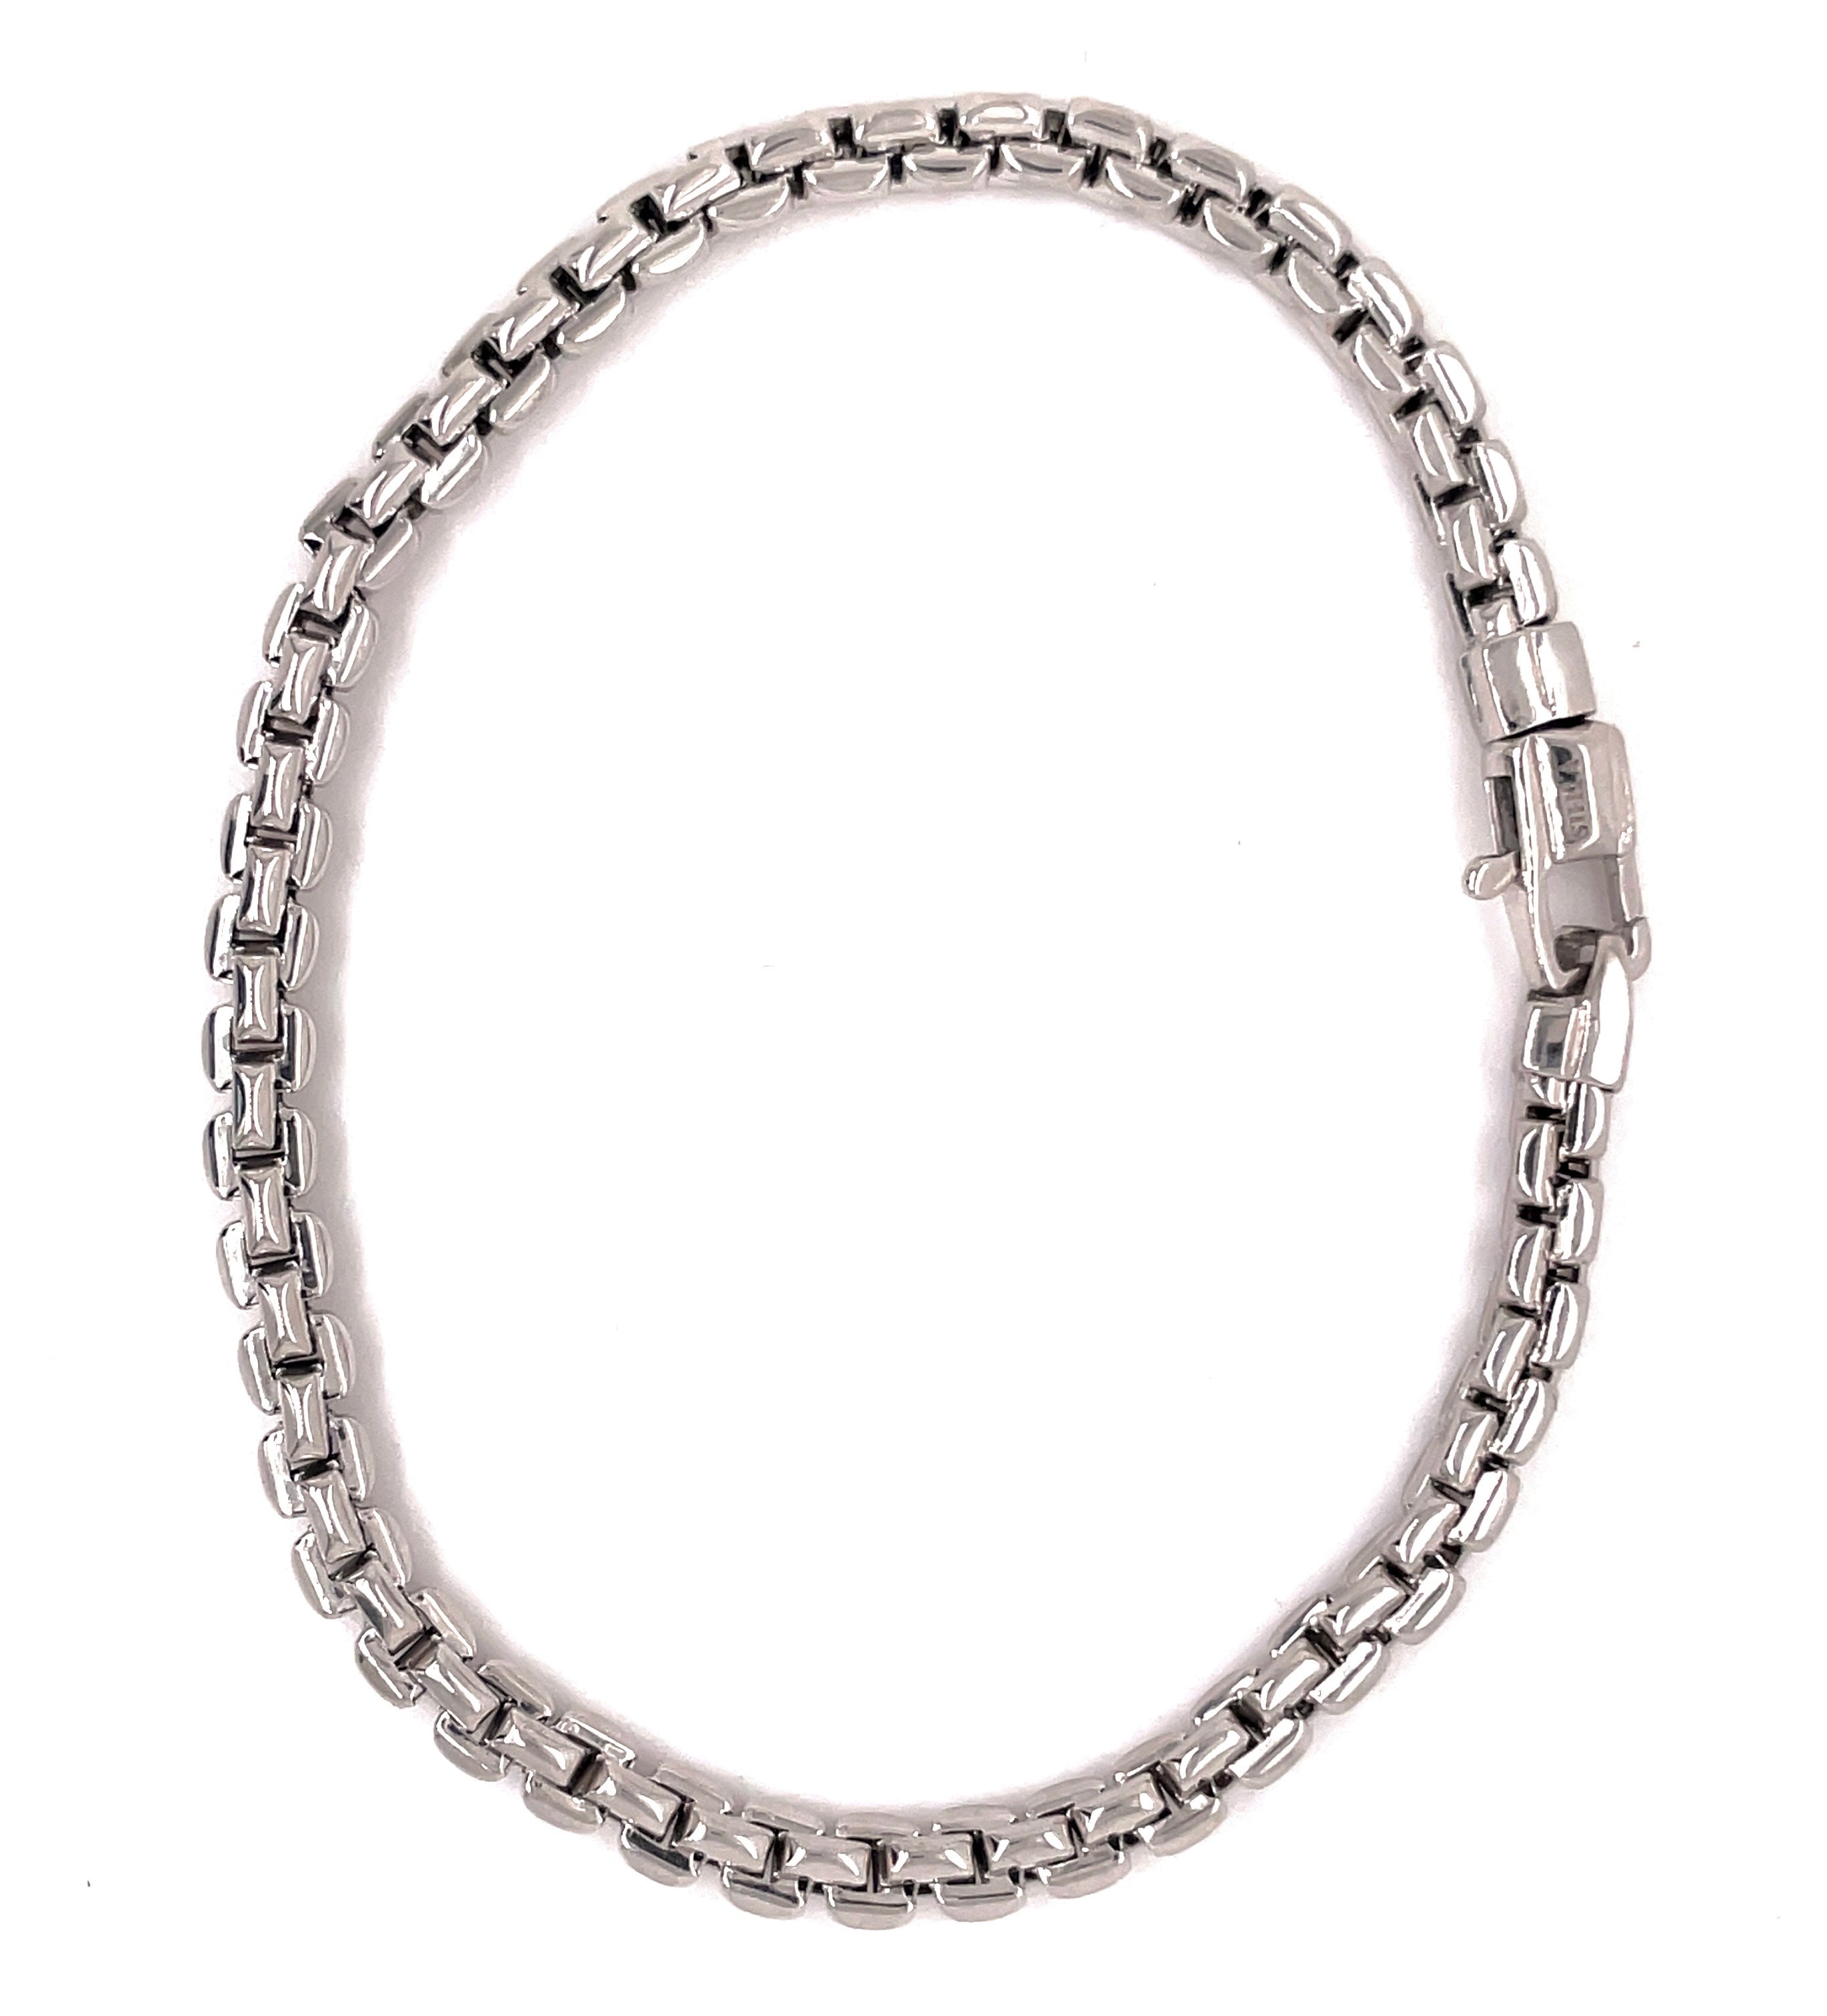 A timeless design crafted with precision and care. With its secure lobster closure and durable 14k white gold construction, this 3.50 mm wide and 8" long Venetian box link bracelet will give you long-lasting style and elegance.